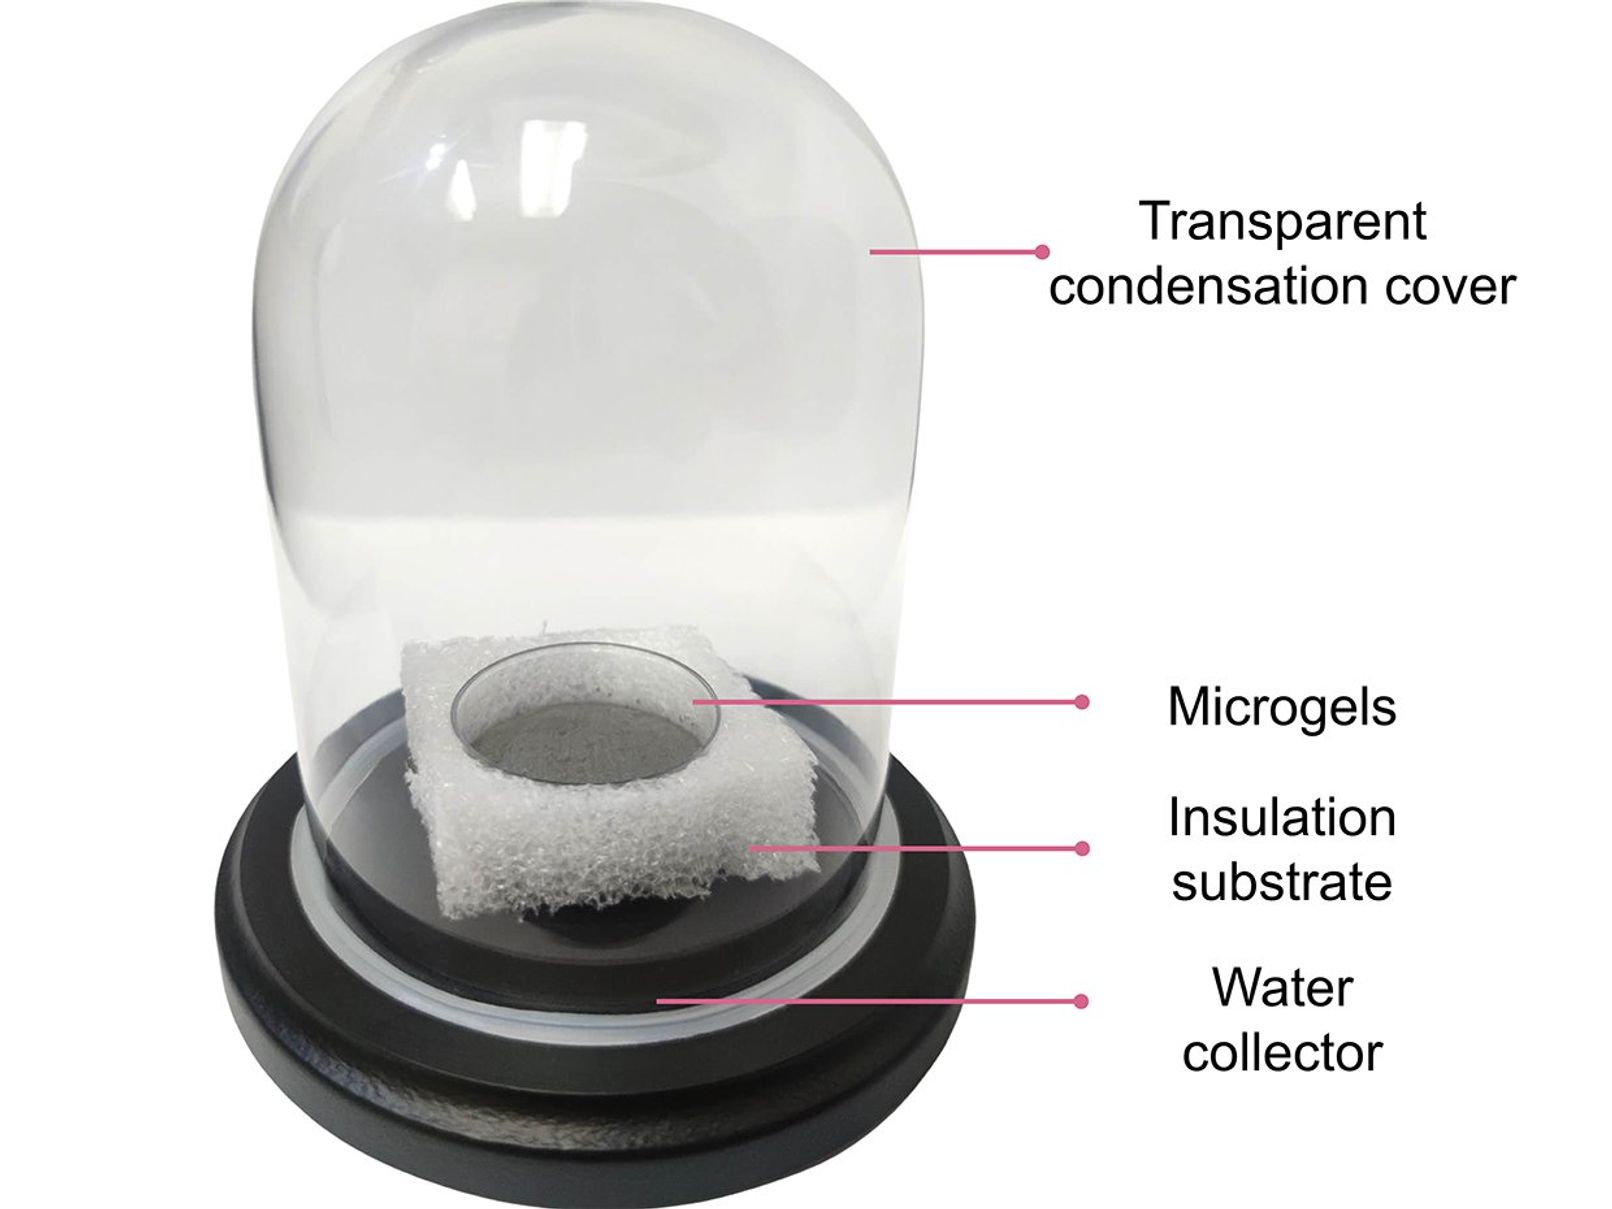 A clear dome sits on a pedestal. Inside is a dish with black powder surrounded by some white foam. A label over the dome say transparent condensation cover, while other labels point to the water collector, insulation substrate, and microgels.